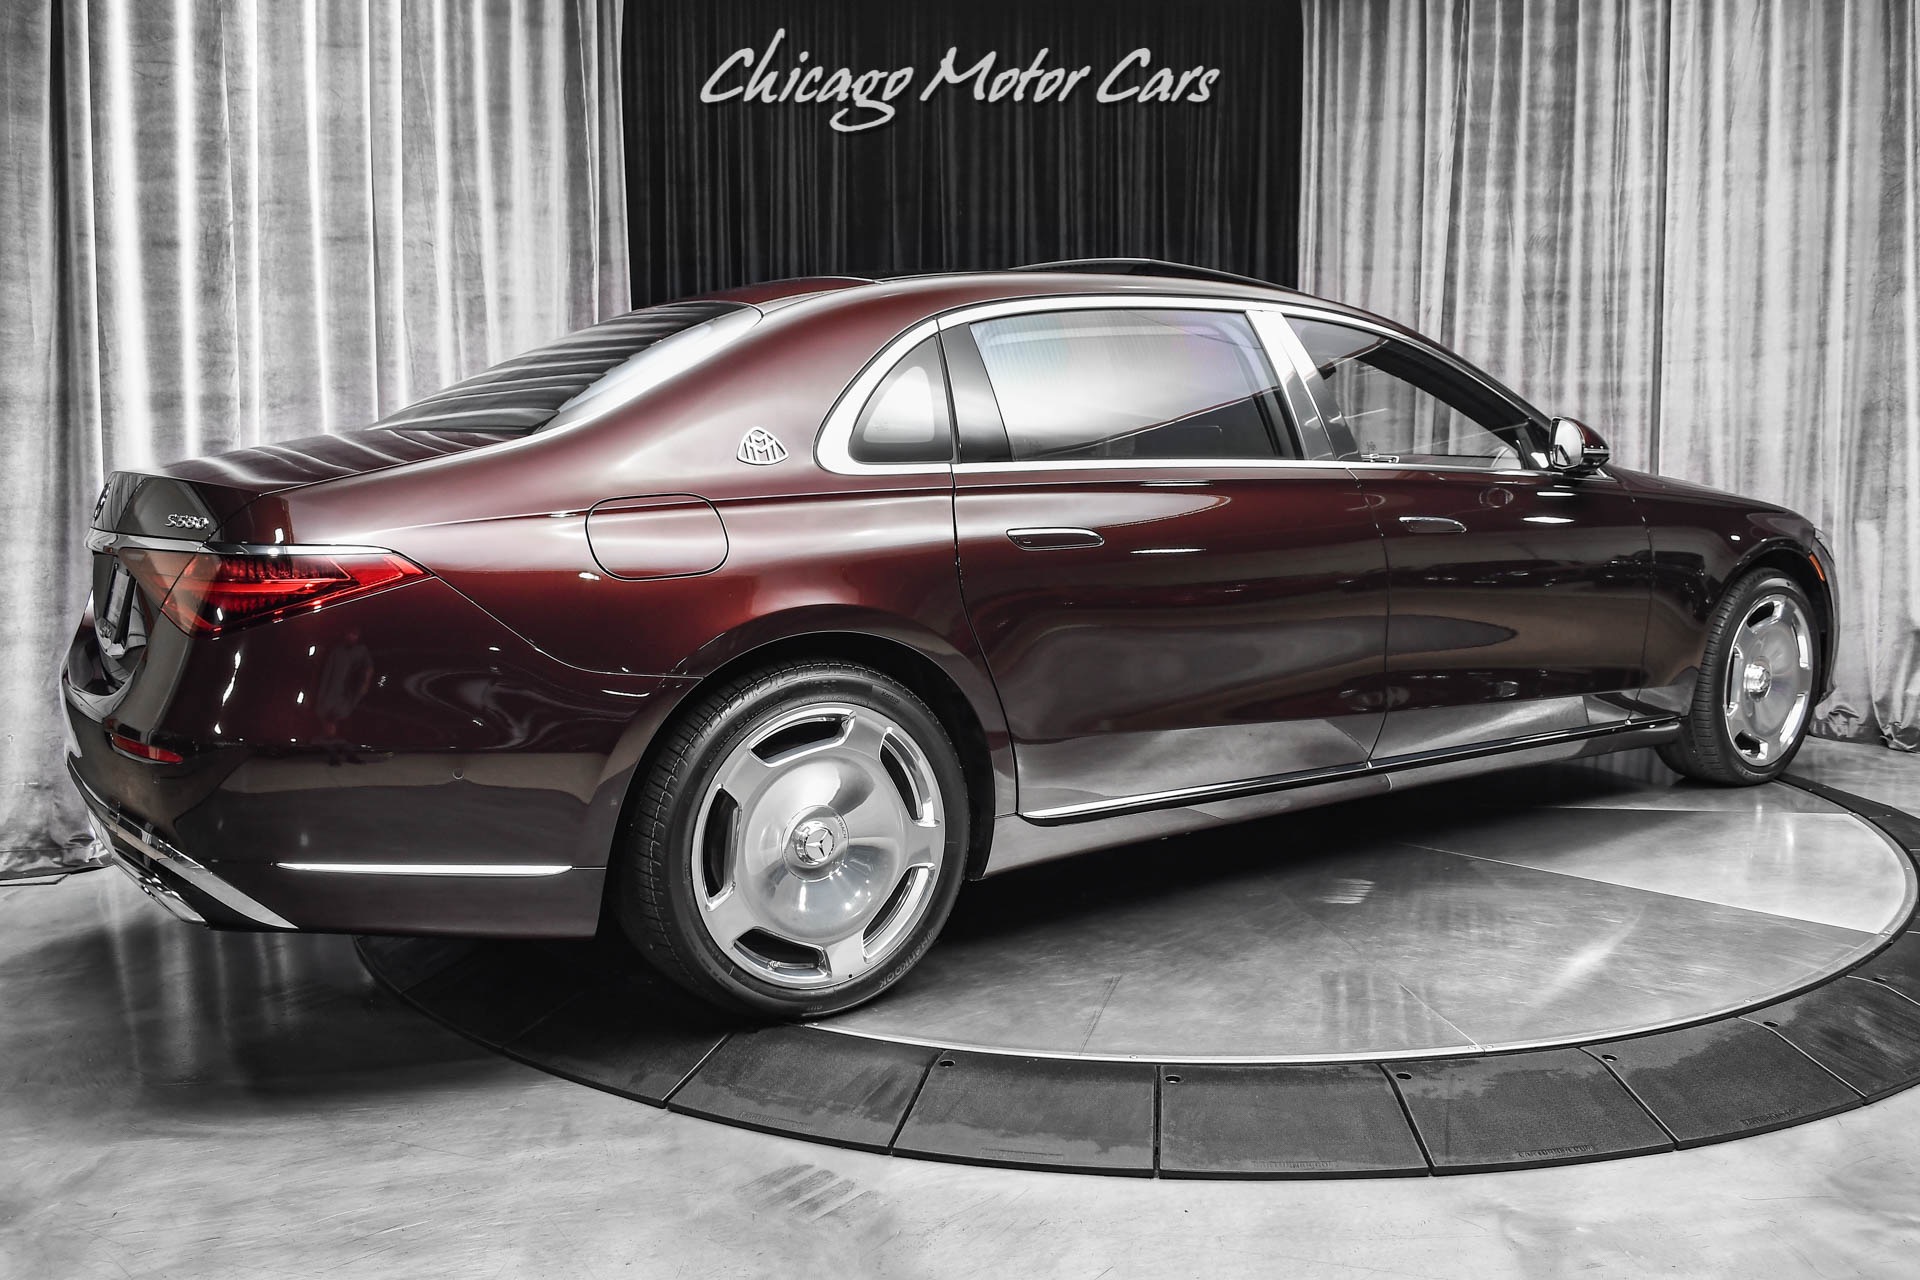 Used-2022-Mercedes-Benz-S580-Maybach-4Matic-Sedan-ONLY-500-Miles-Flowing-Lines-Trim-Gorgeous-Color-Combo